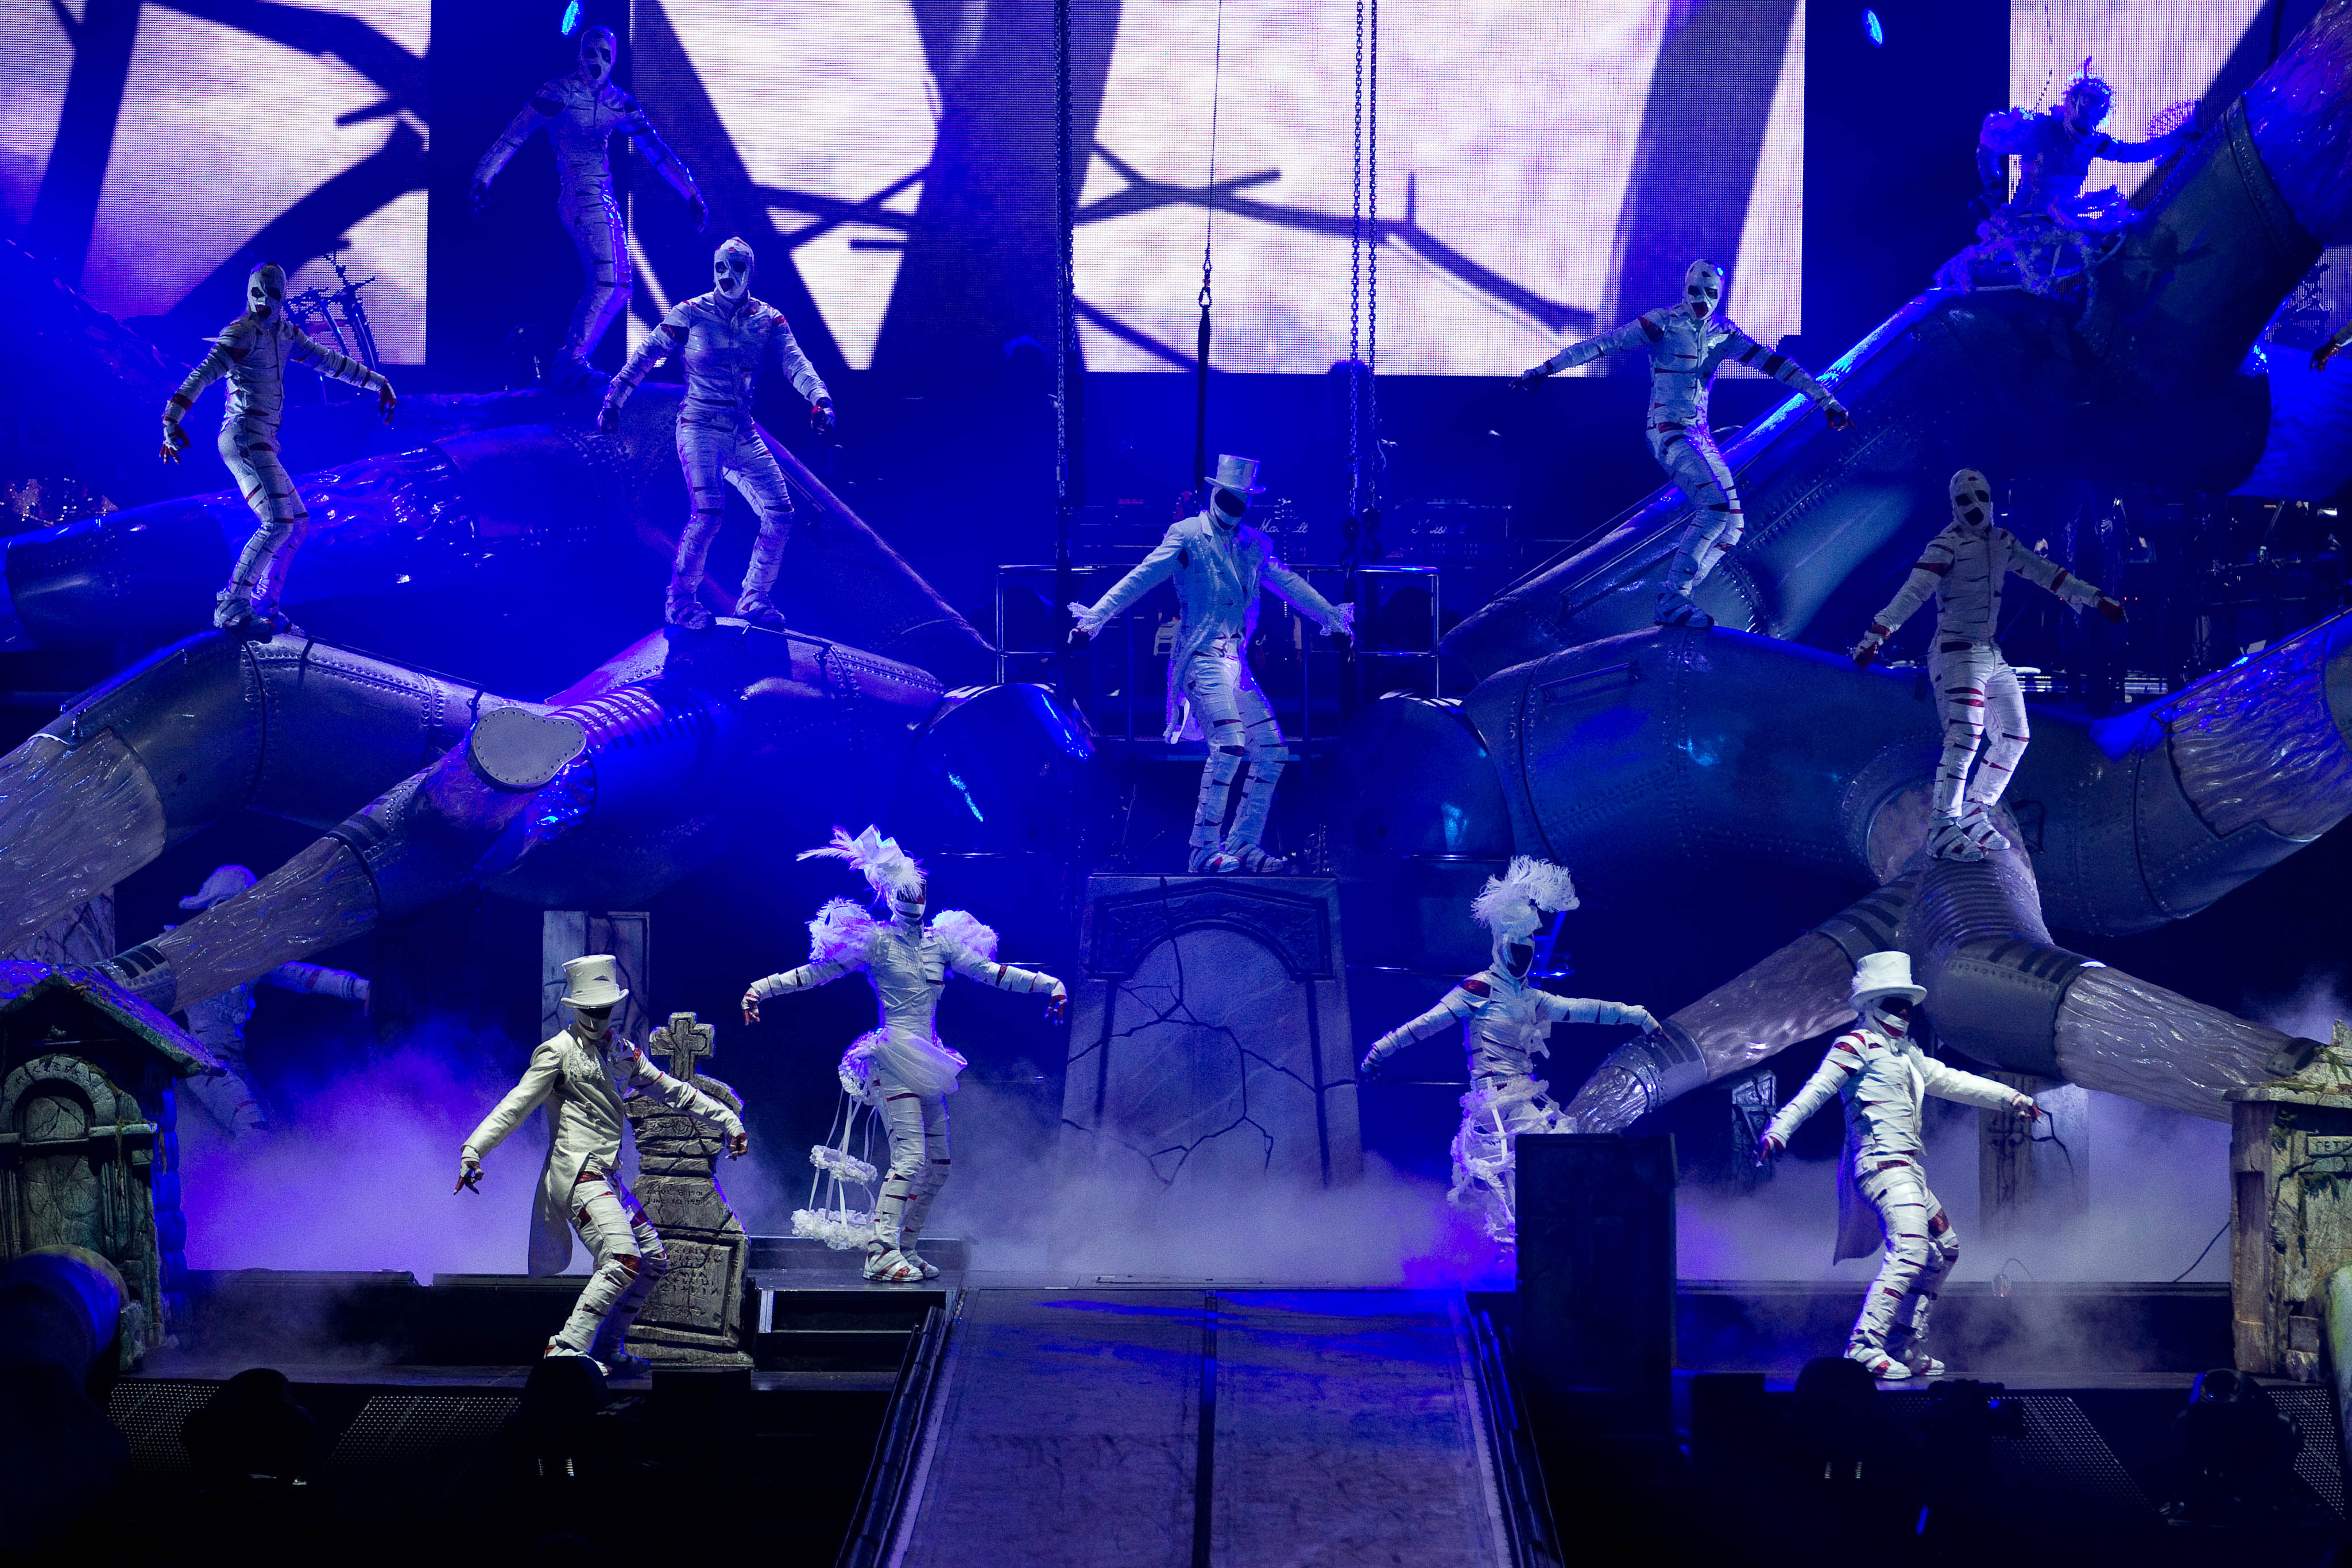 Last night with Michael: Cirque Du Soleil revives the King of Pop